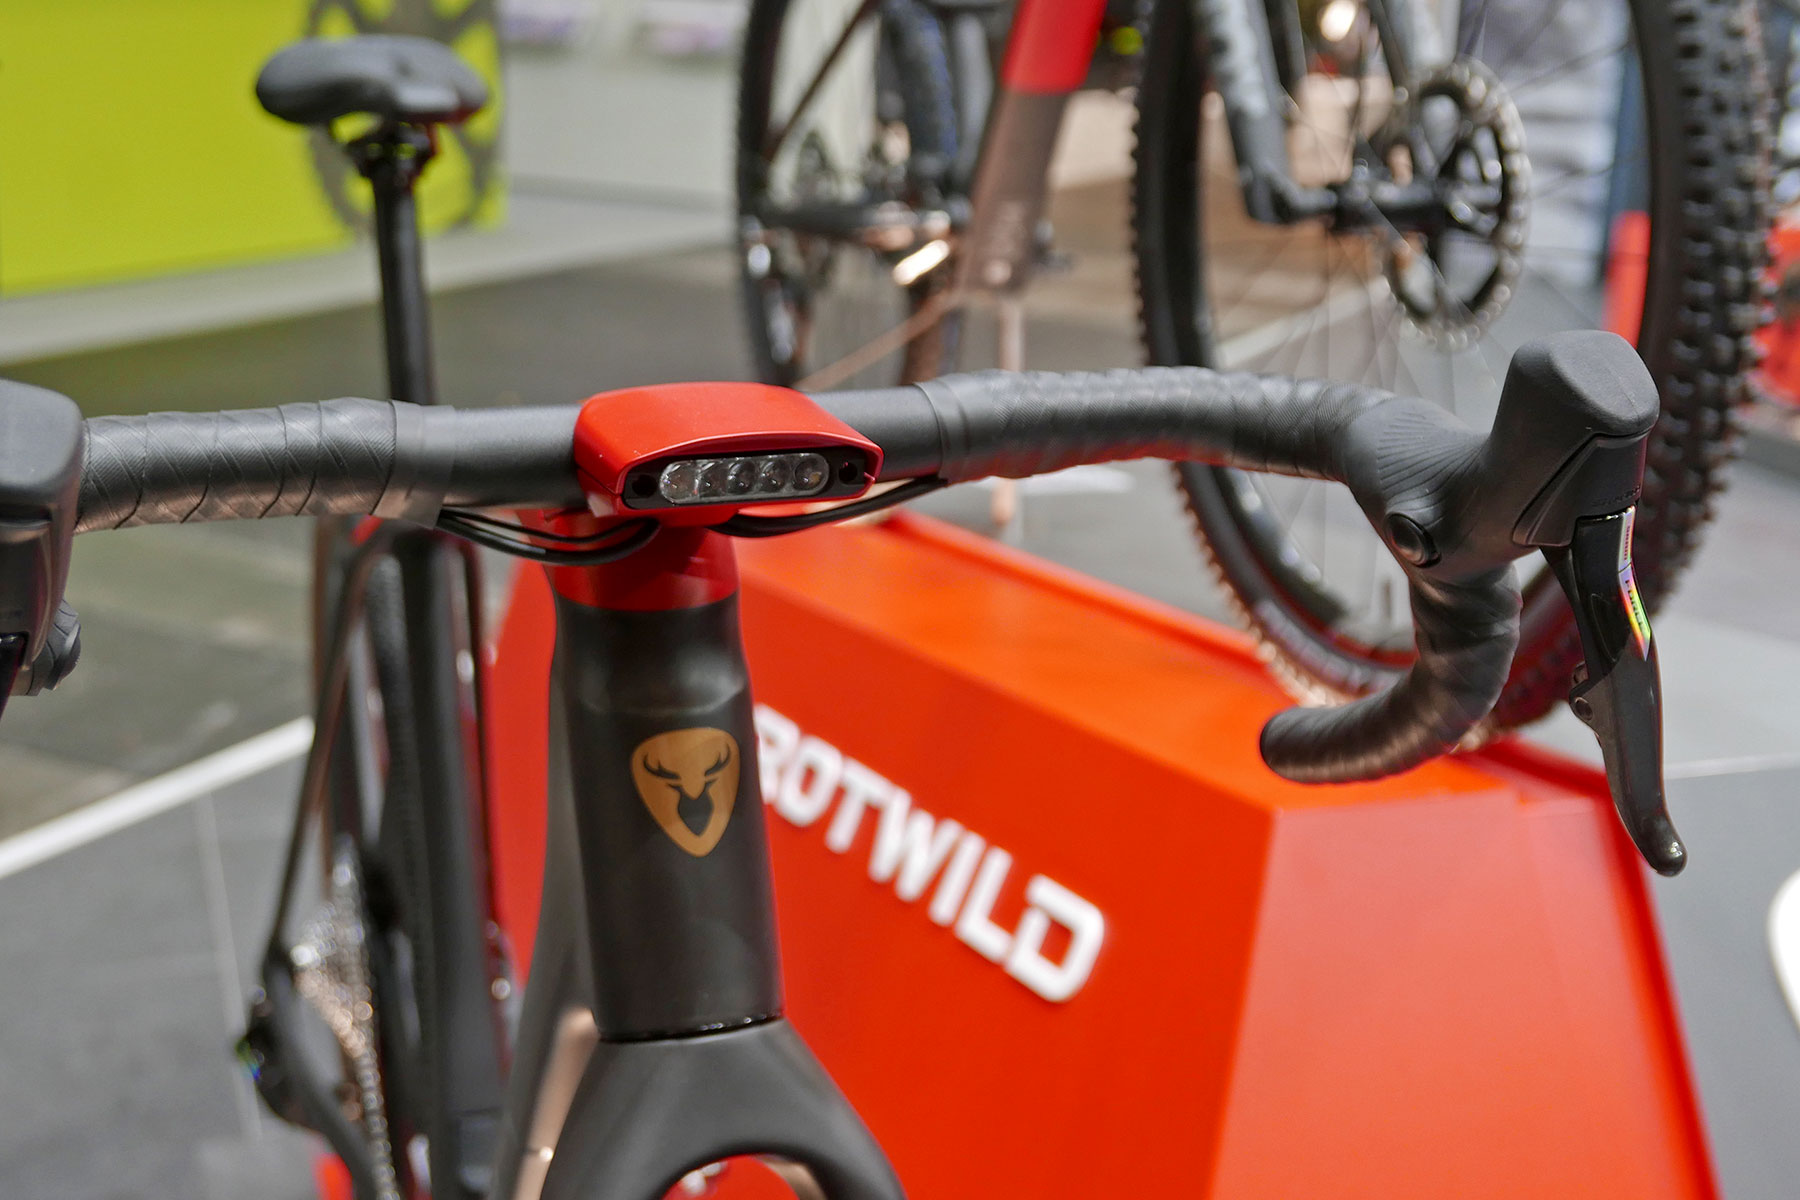 Rotwild R-R275 X gravel ebike, a lightweight TQ-powered fully integrated all-road e-bike, Eurobike preview integrated headlight